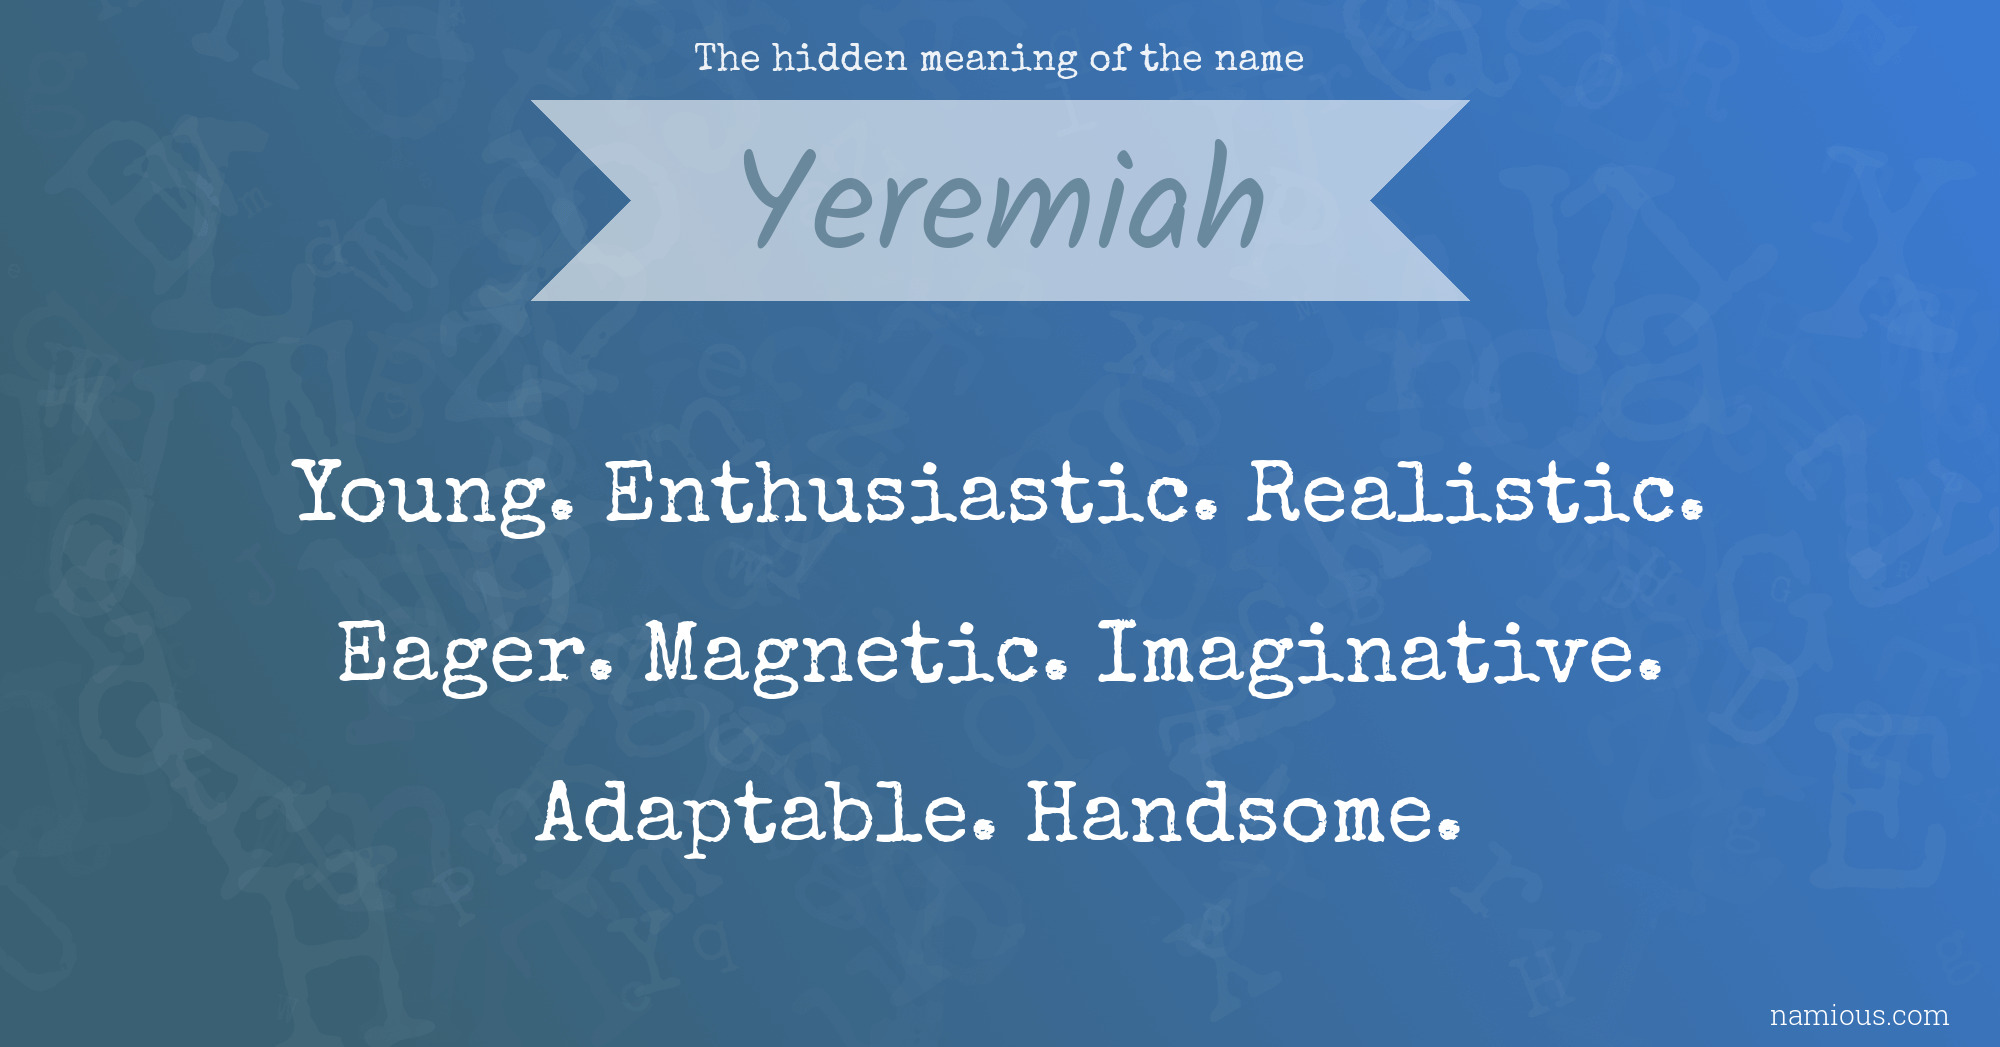 The hidden meaning of the name Yeremiah